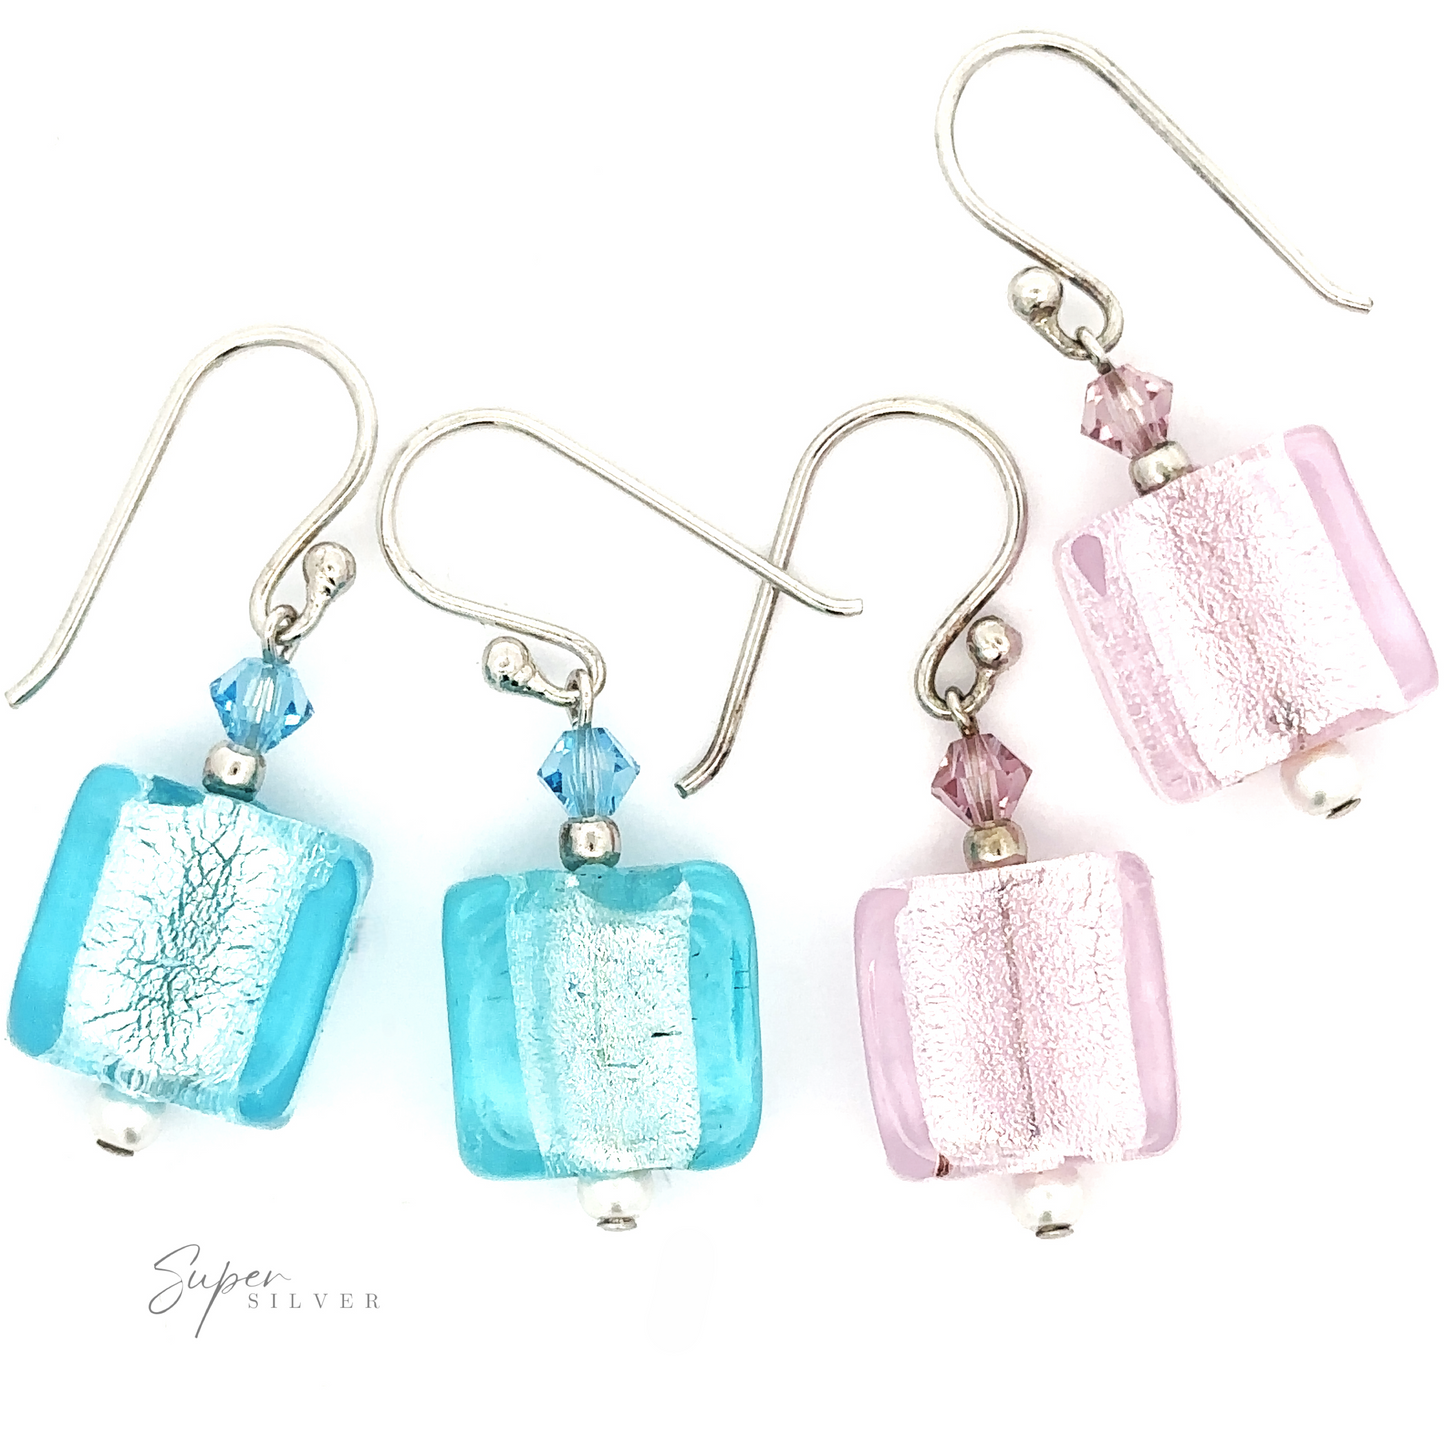 
                  
                    A set of Beaded Resin Earrings with Small Pearls, featuring glass beads in pink and blue with small crystal embellishments, placed against a white background.
                  
                